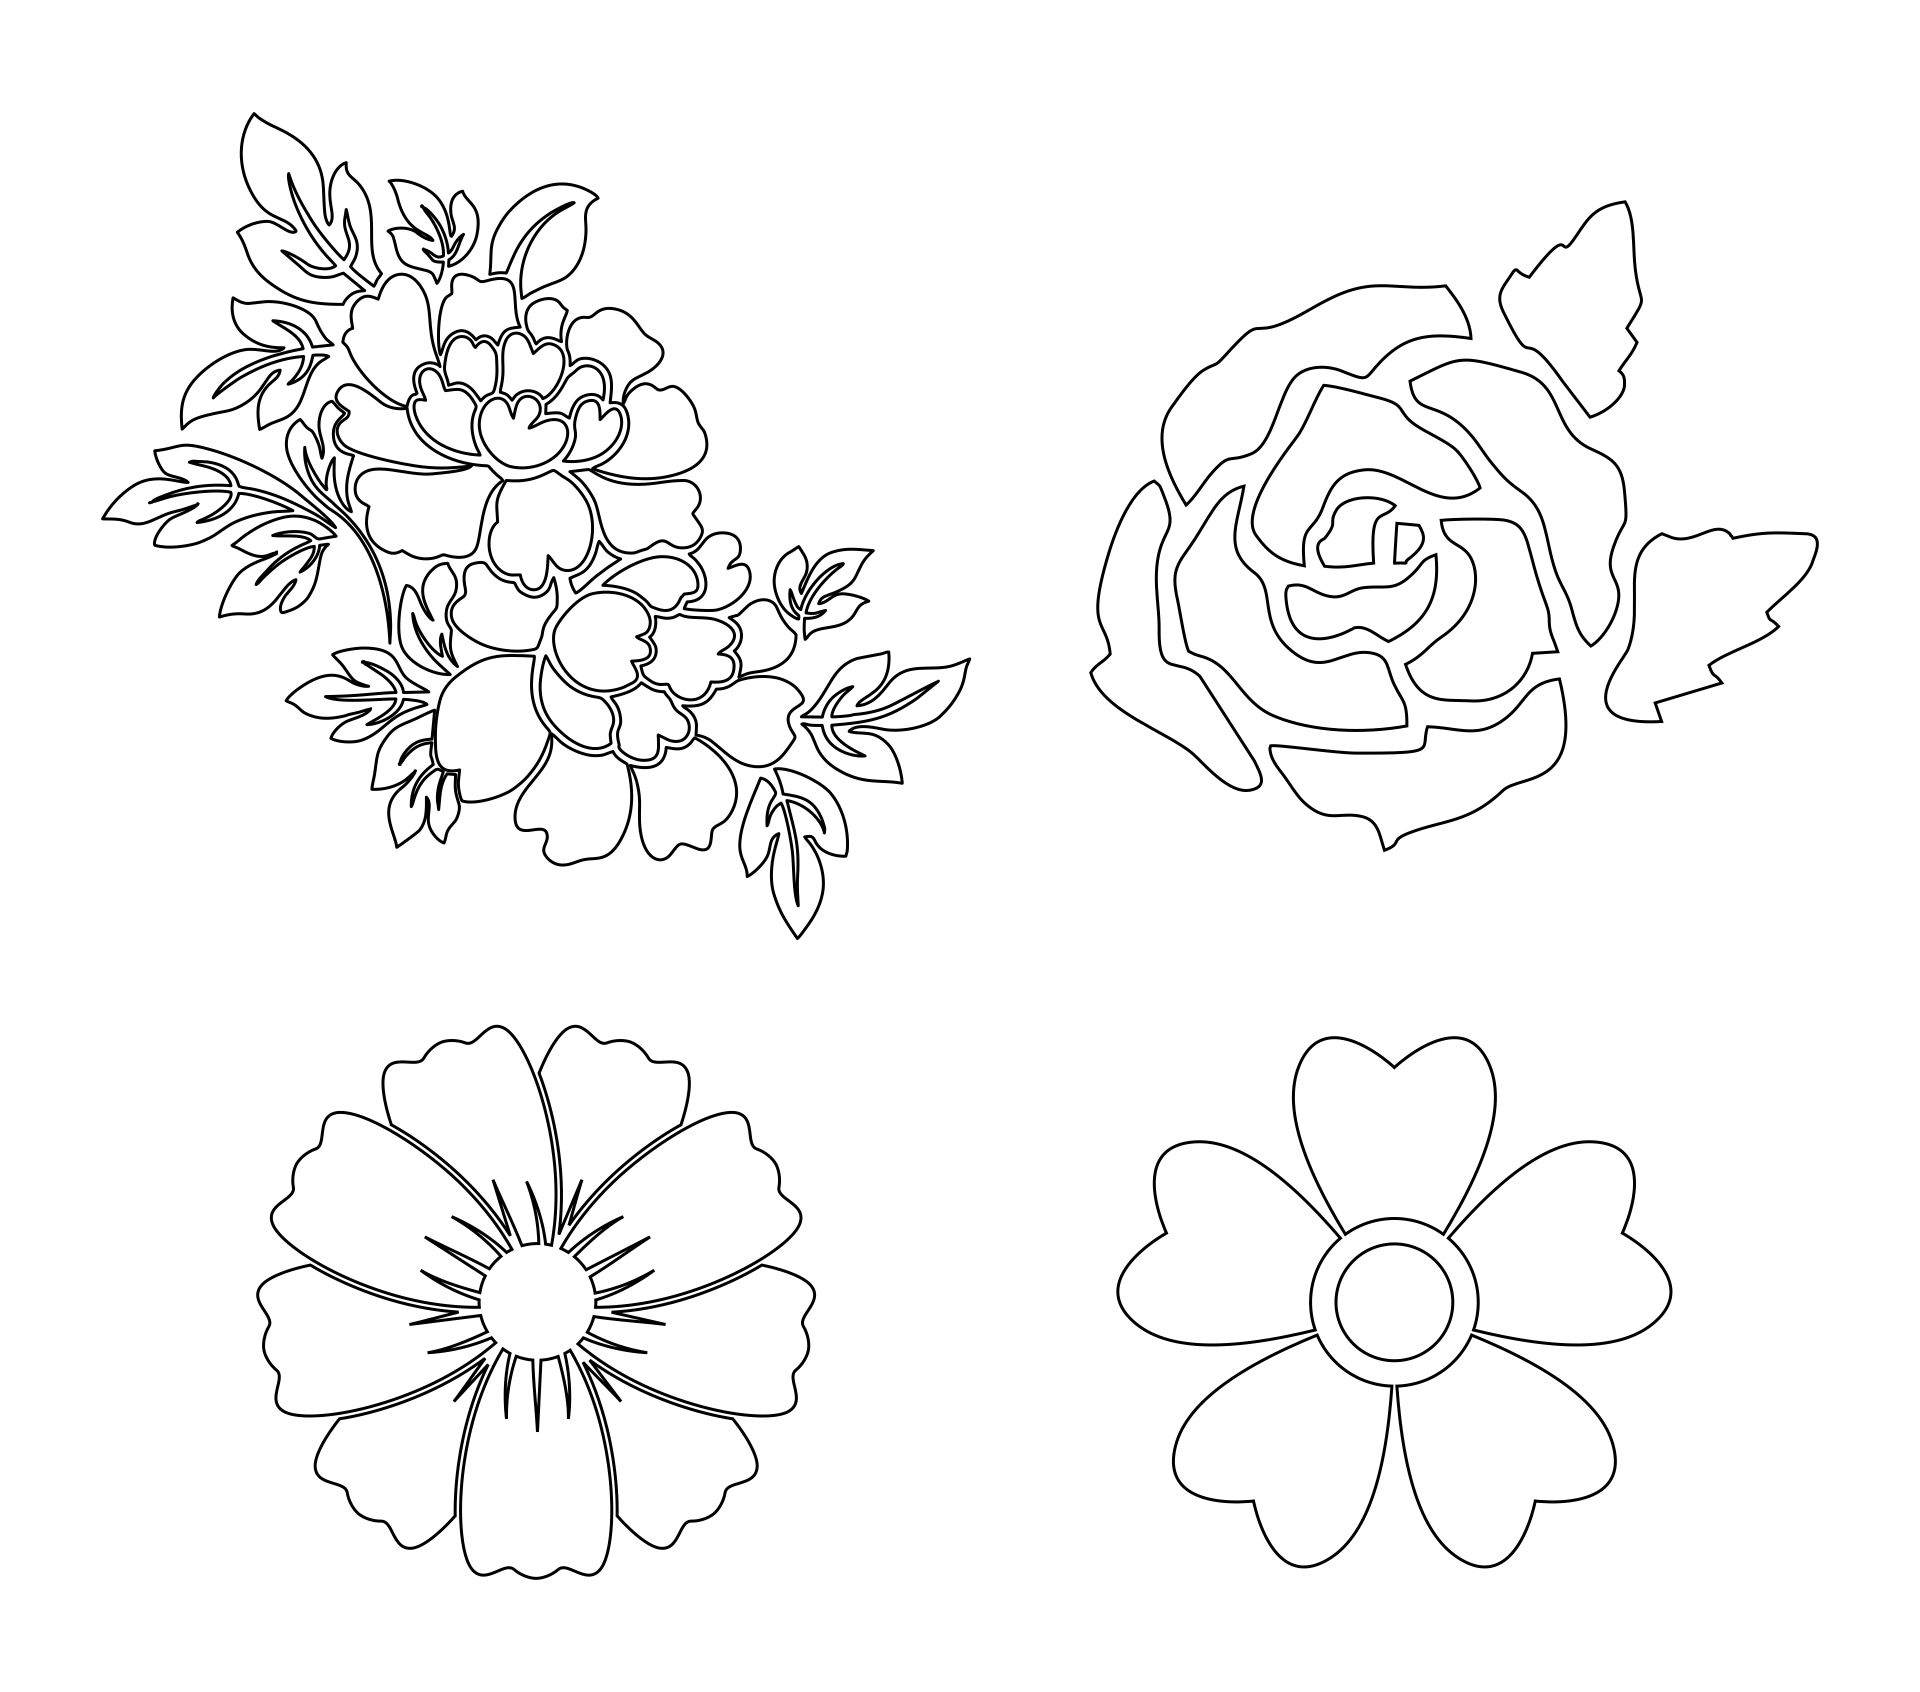 flower-cut-out-printable-stencil-designs-printable-word-searches